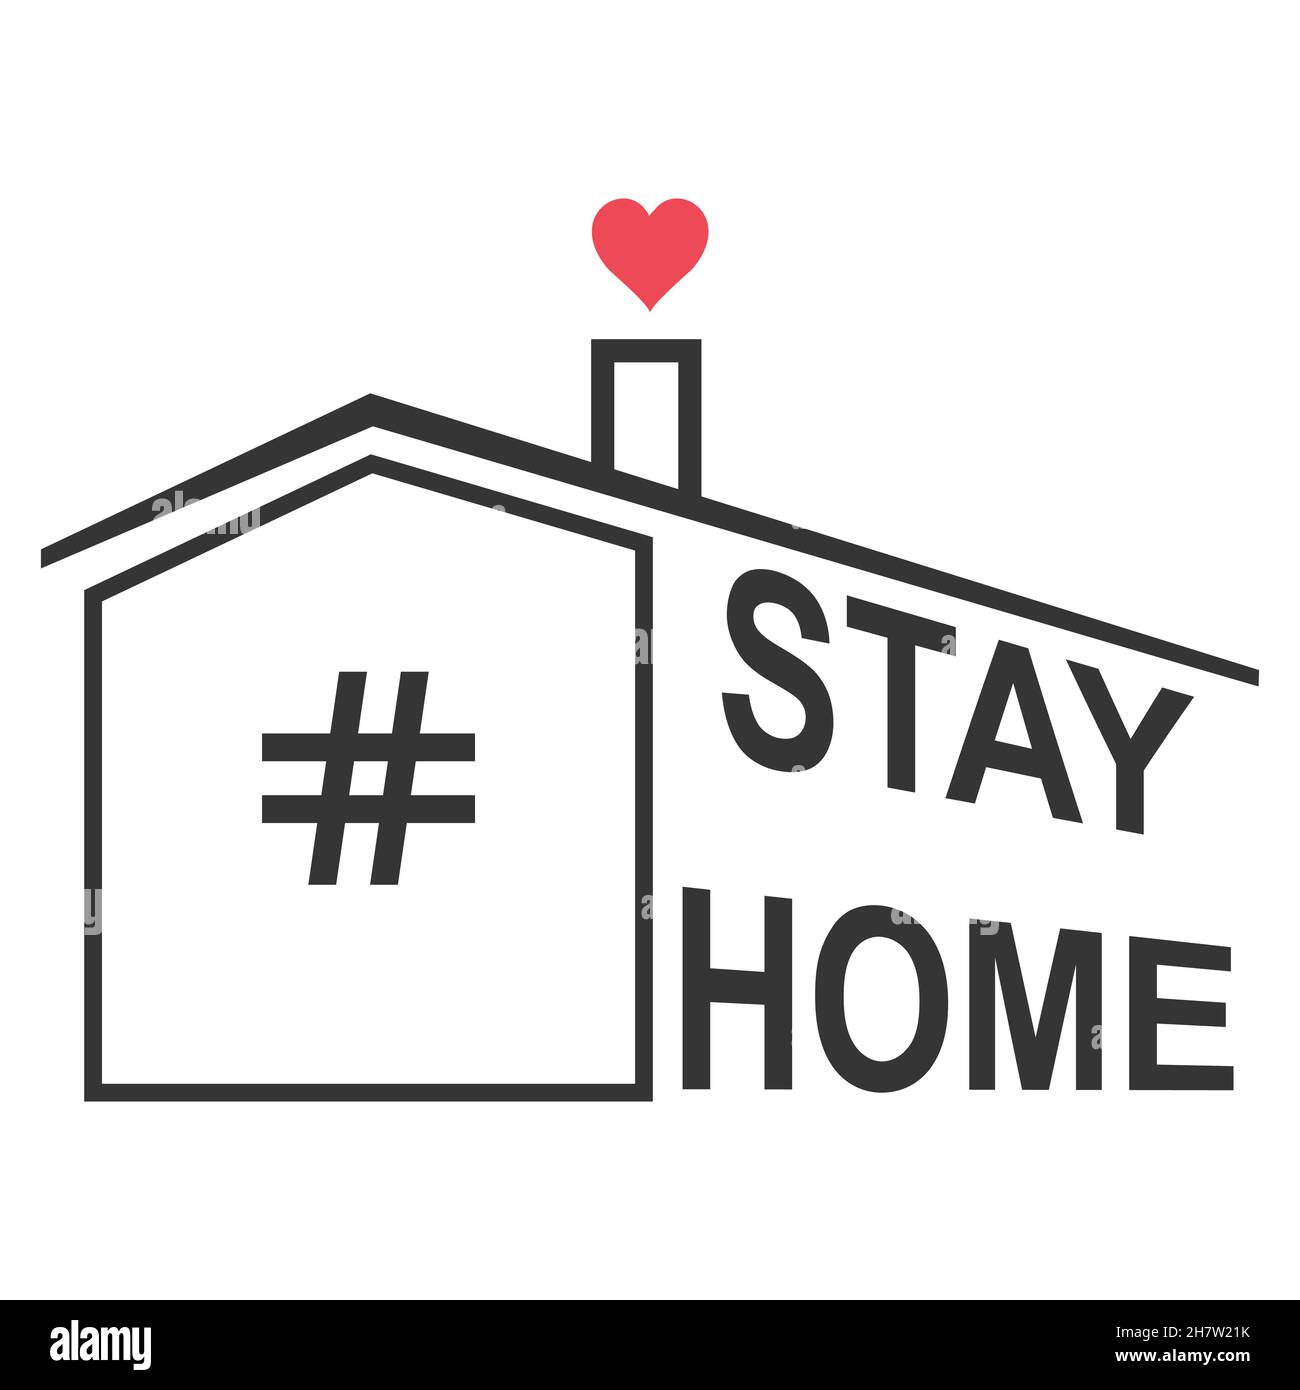 Stay home text under the roof house heart above the roof. COVID 19 or coronavirus campaign logo. Self isolation sign virus prevention concept Stock Vector